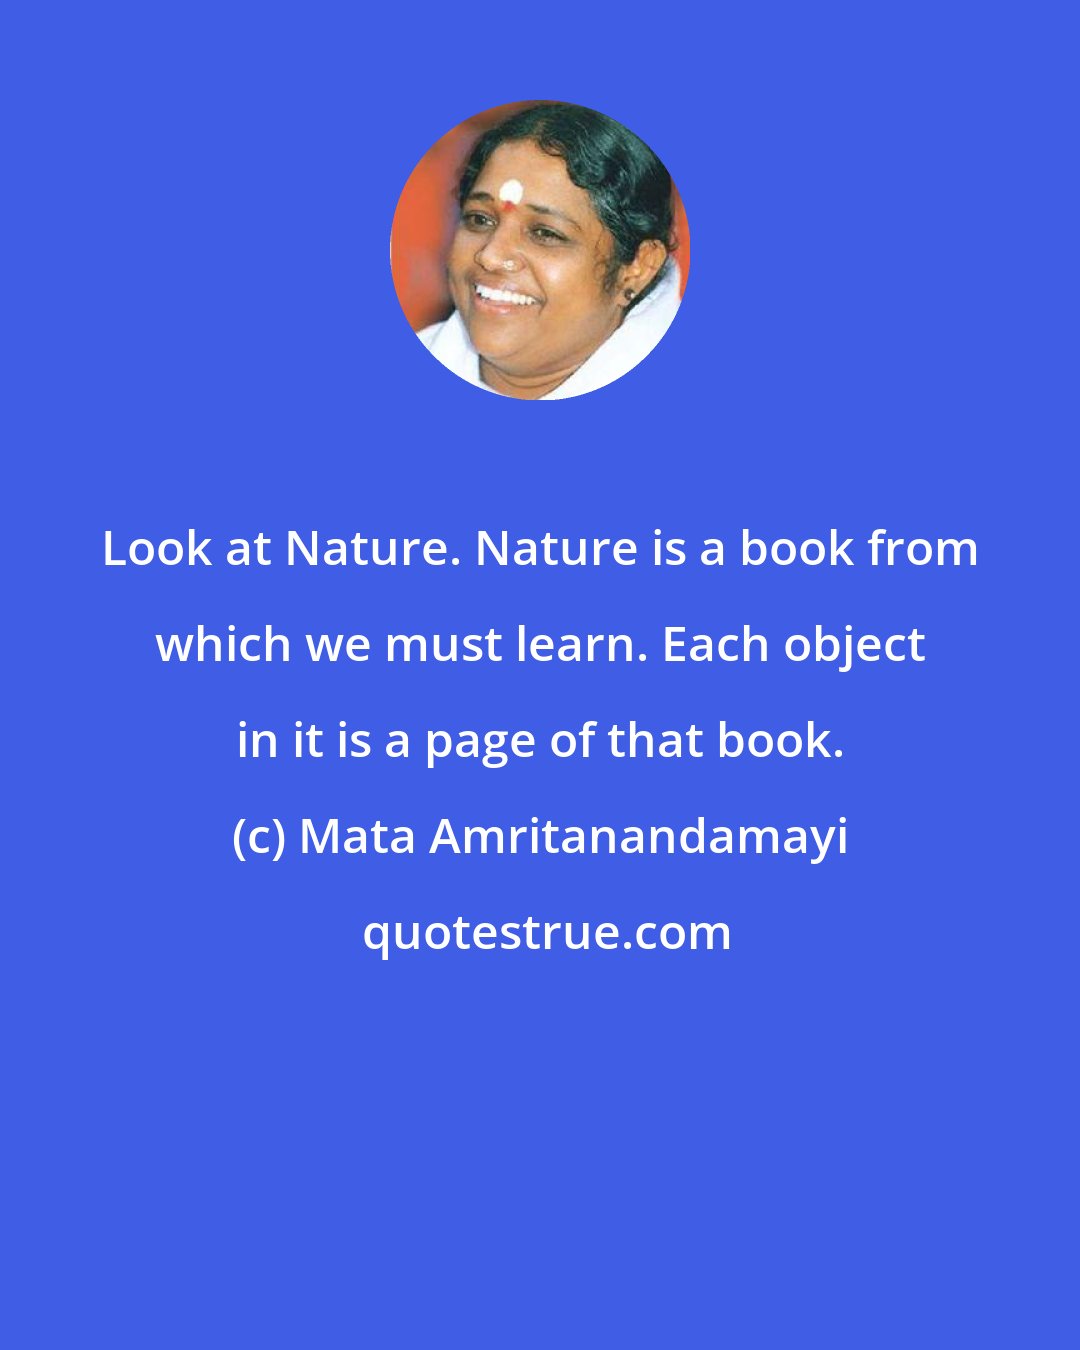 Mata Amritanandamayi: Look at Nature. Nature is a book from which we must learn. Each object in it is a page of that book.